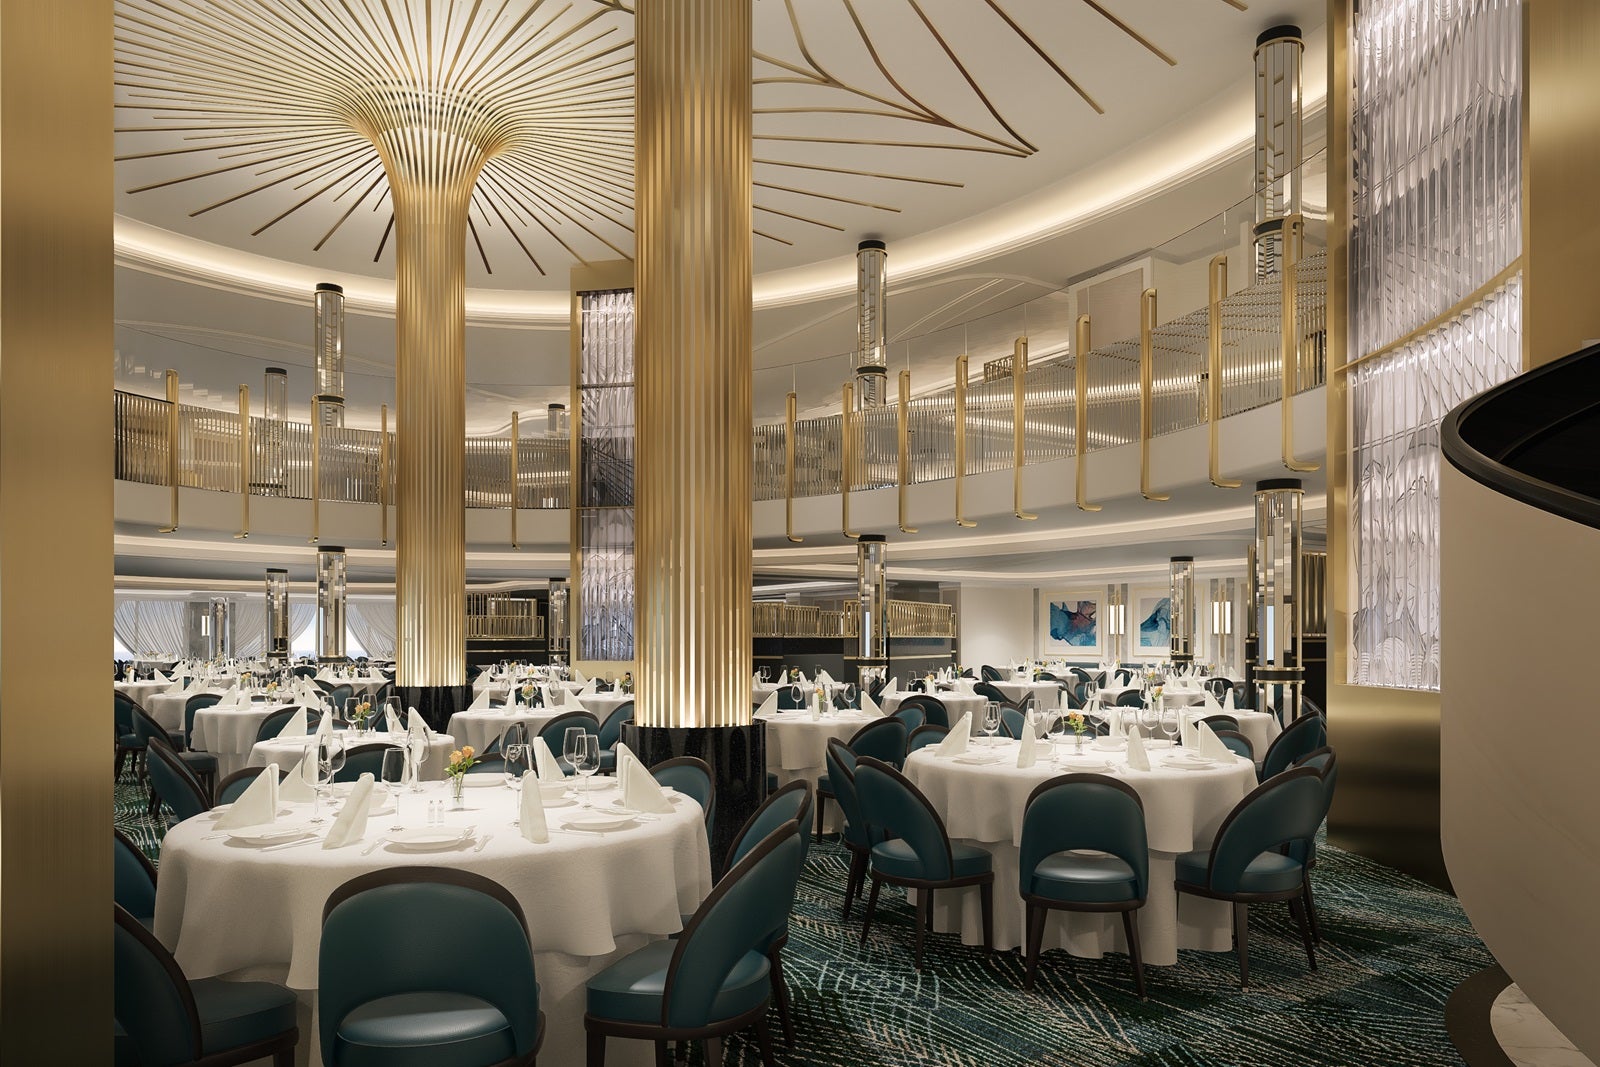 The main dining room on Cunard's Queen Anne cruise ship